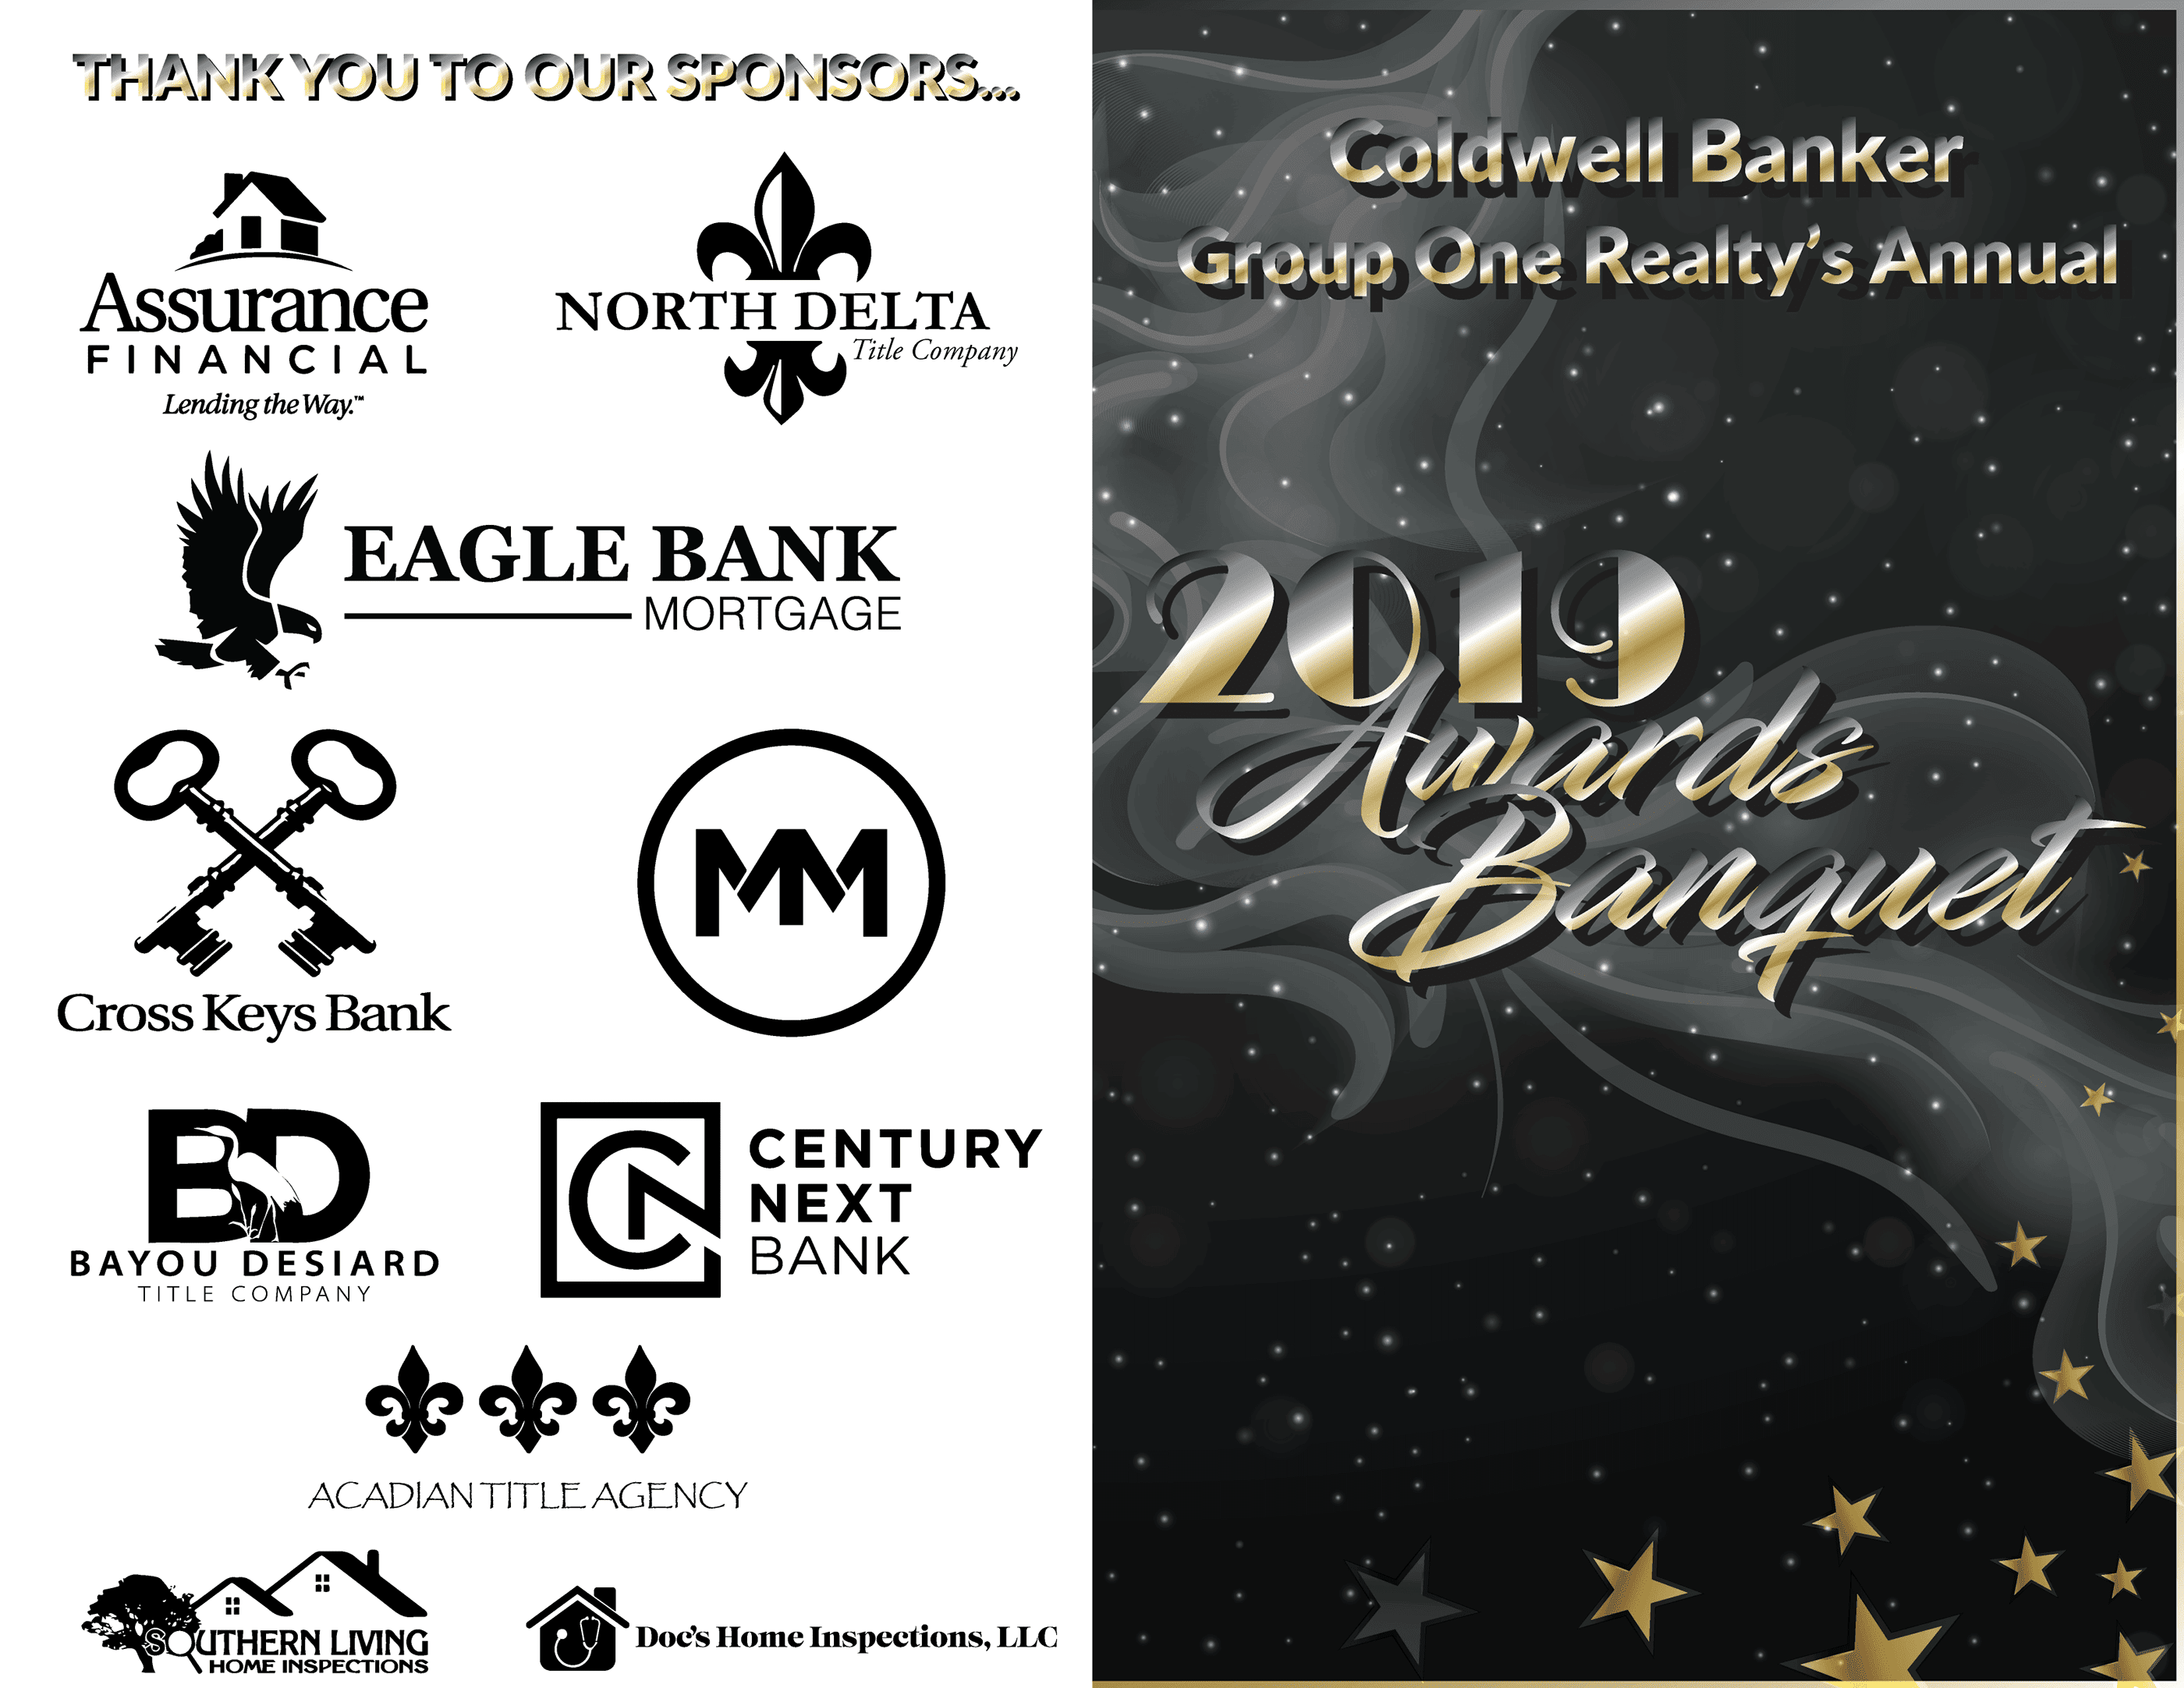 Coldwell Banker Group One Realty 2019 awards banquet itinerary